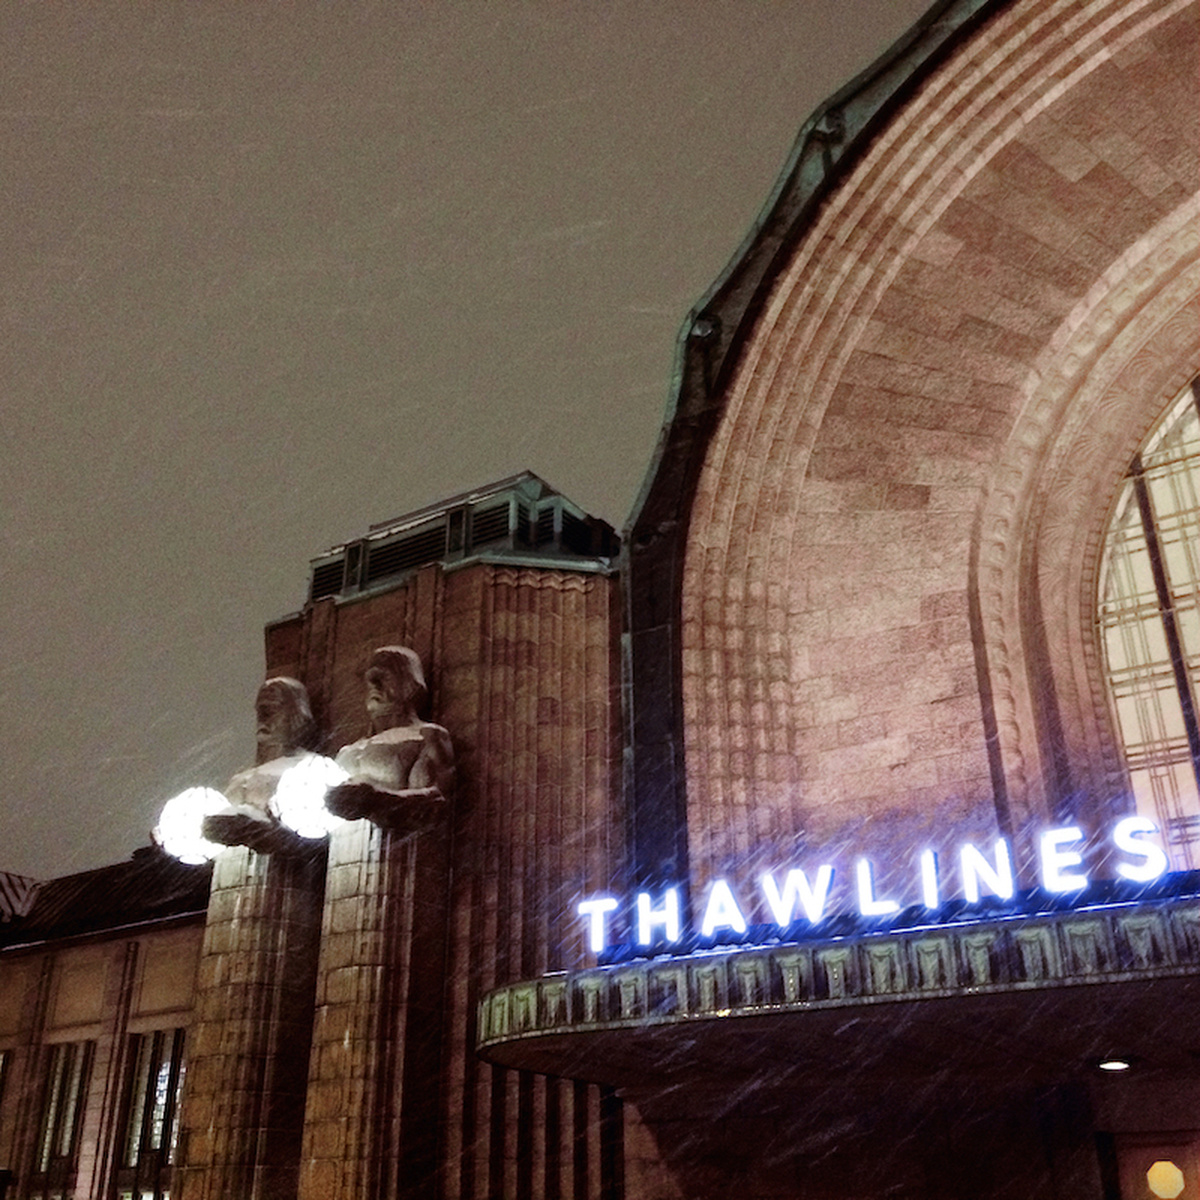 A photograph of a part of a large building, the word "Thawlines" is written on a neon sign.